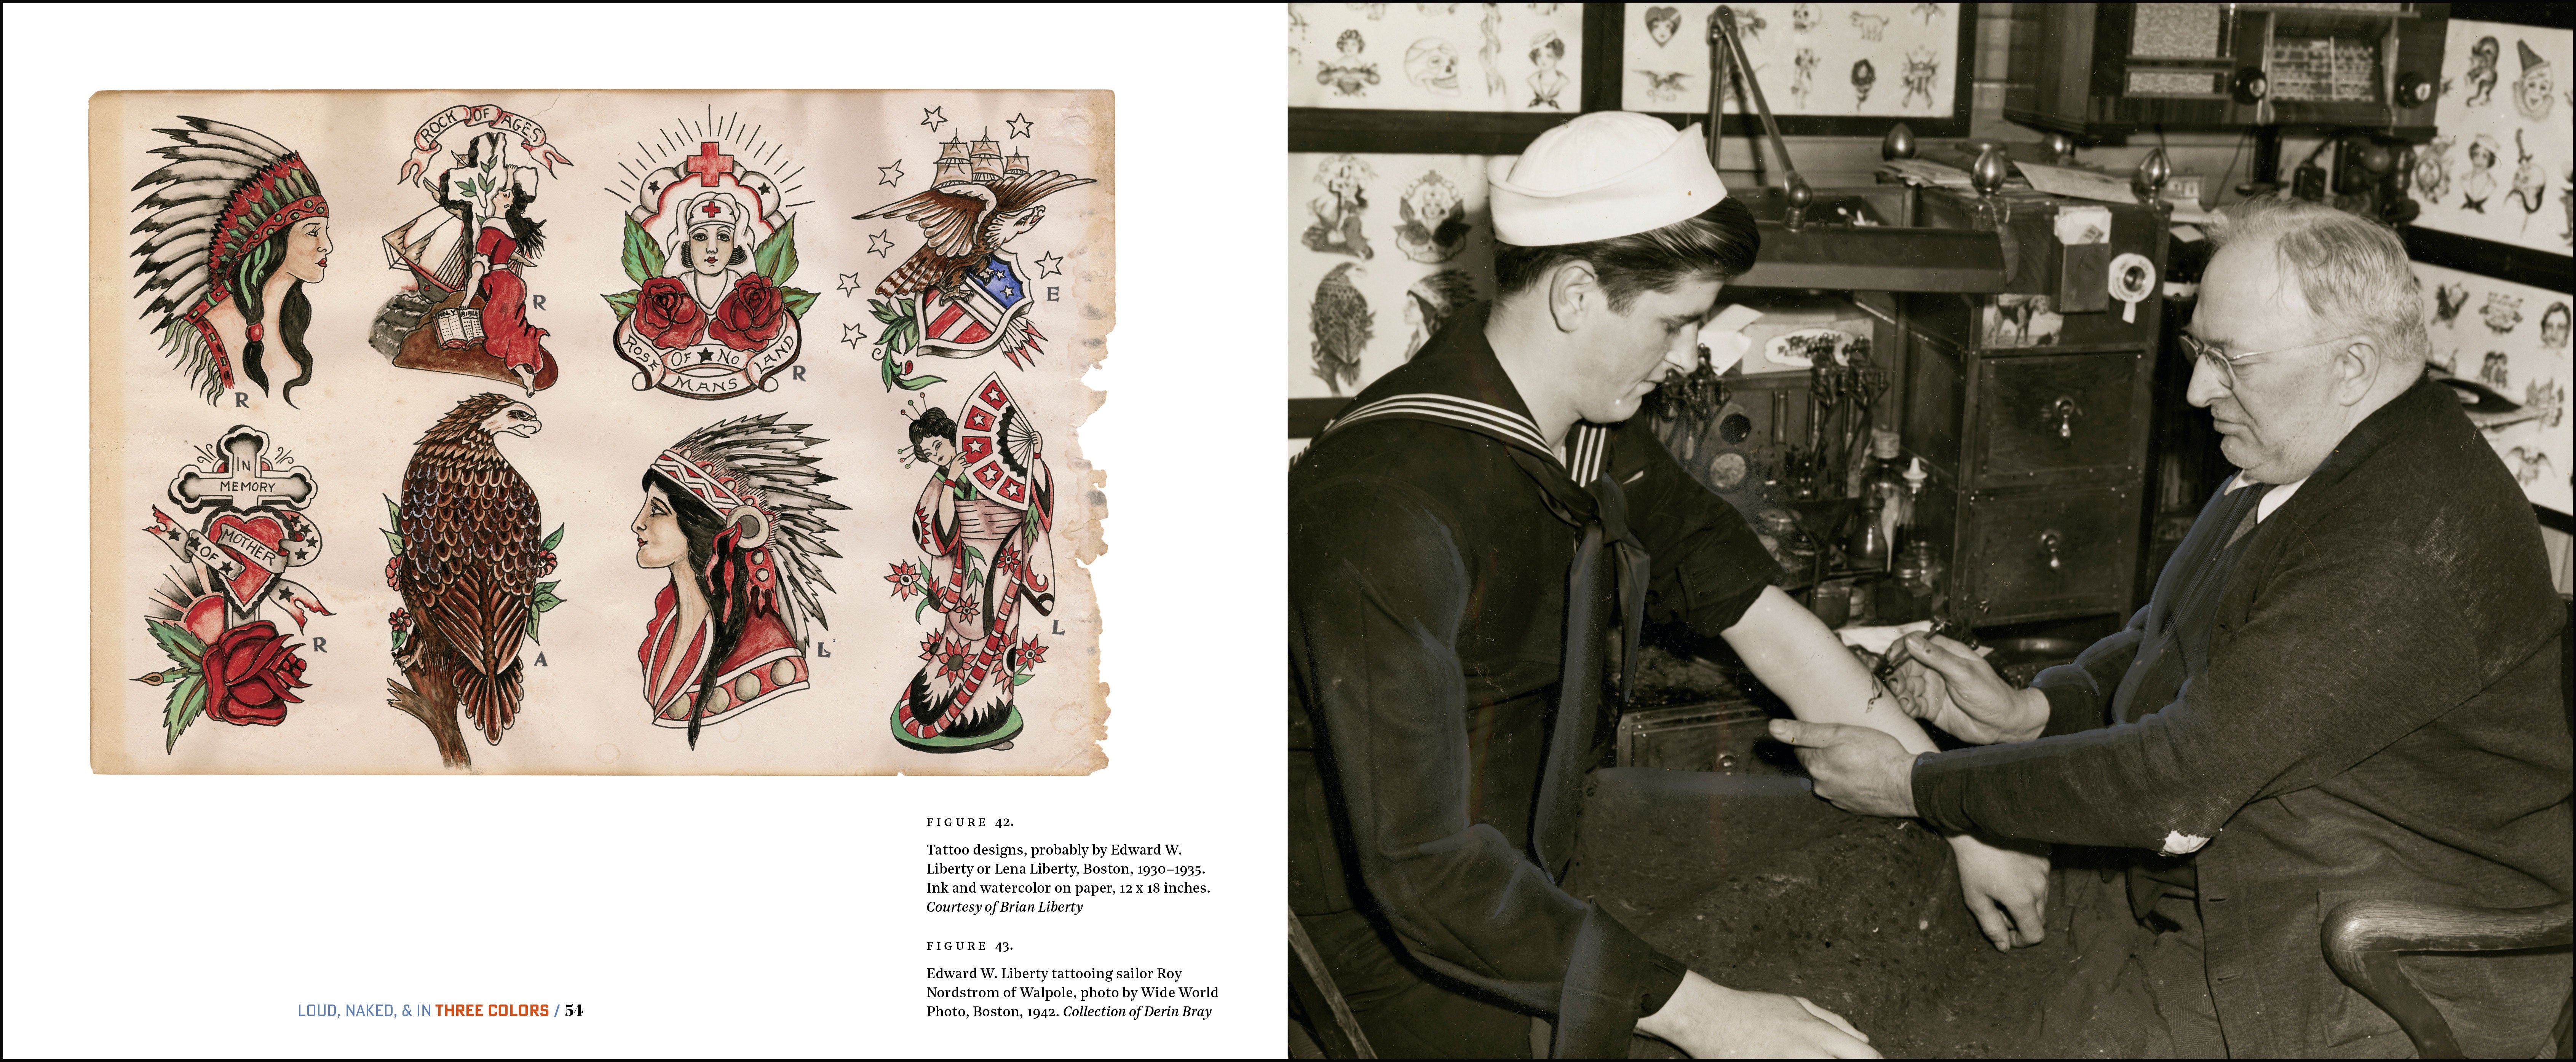 Loud, Naked, & in Three Colors: The Liberty Boys & The History of Tattooing in Boston